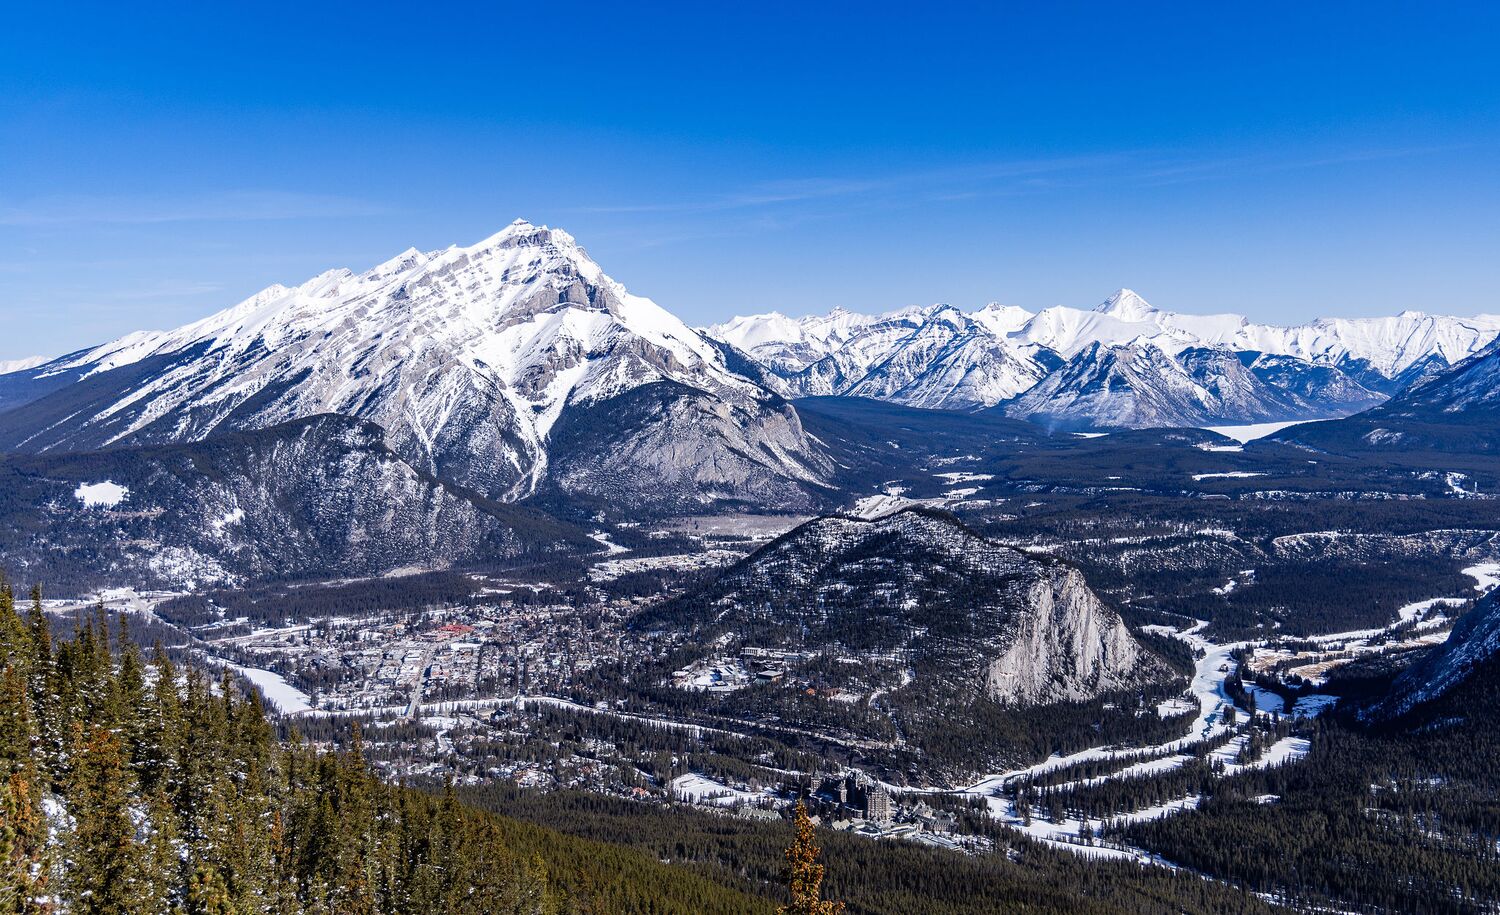 The view from the top of the Banff Gondola in Banff National Park.